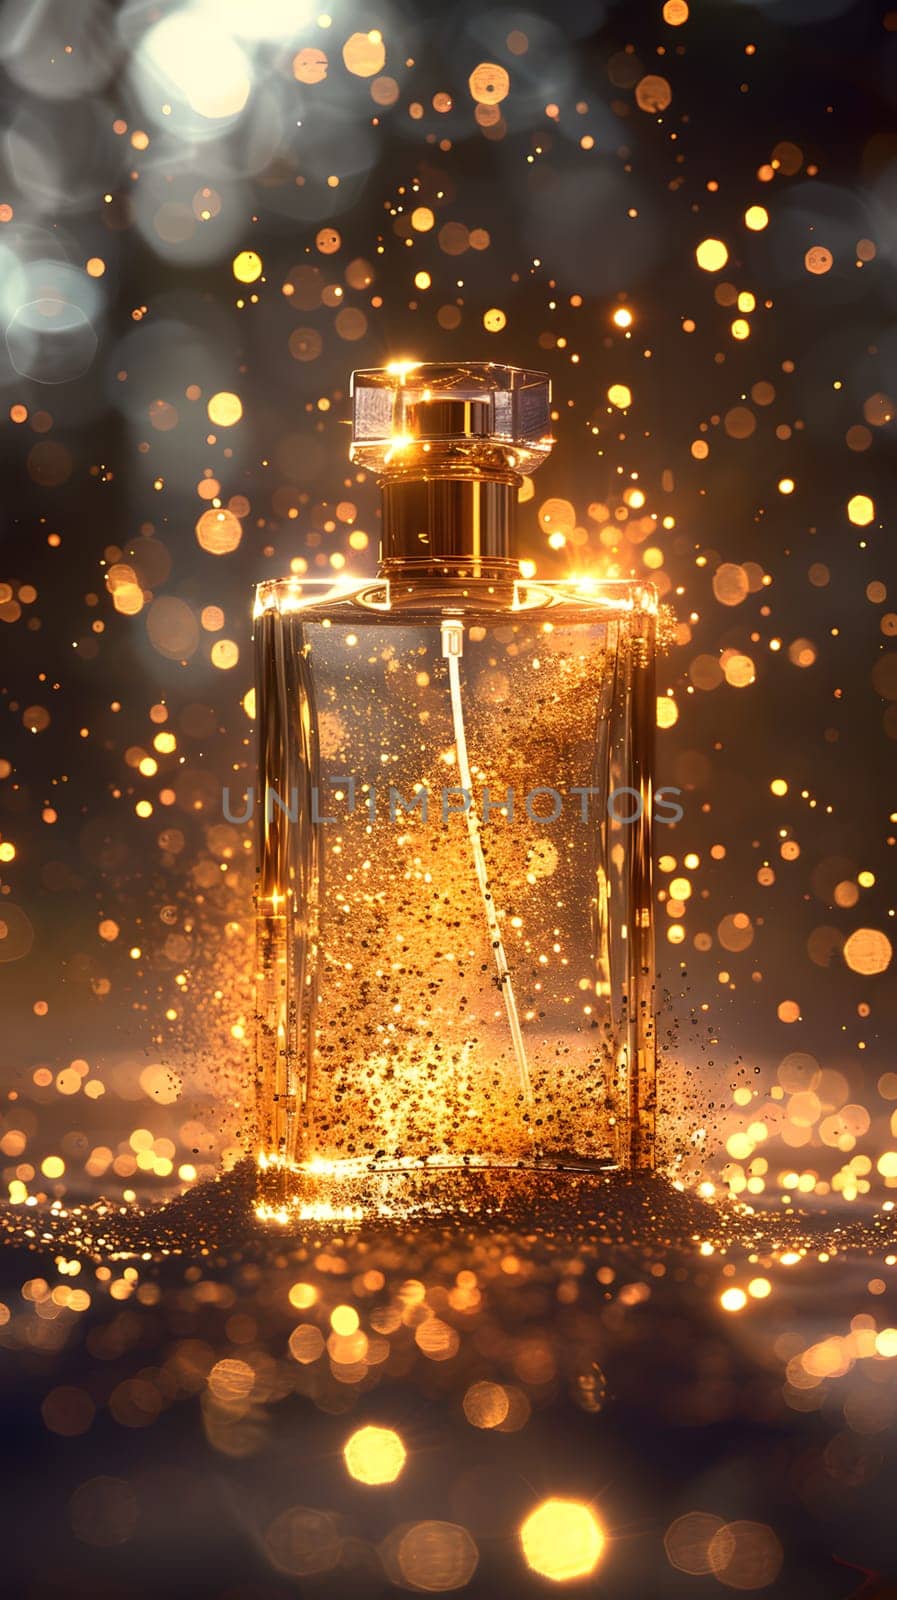 The atmosphere shimmered with gold glitter as a bottle of perfume sparkled like fireworks in the city skyline at midnight